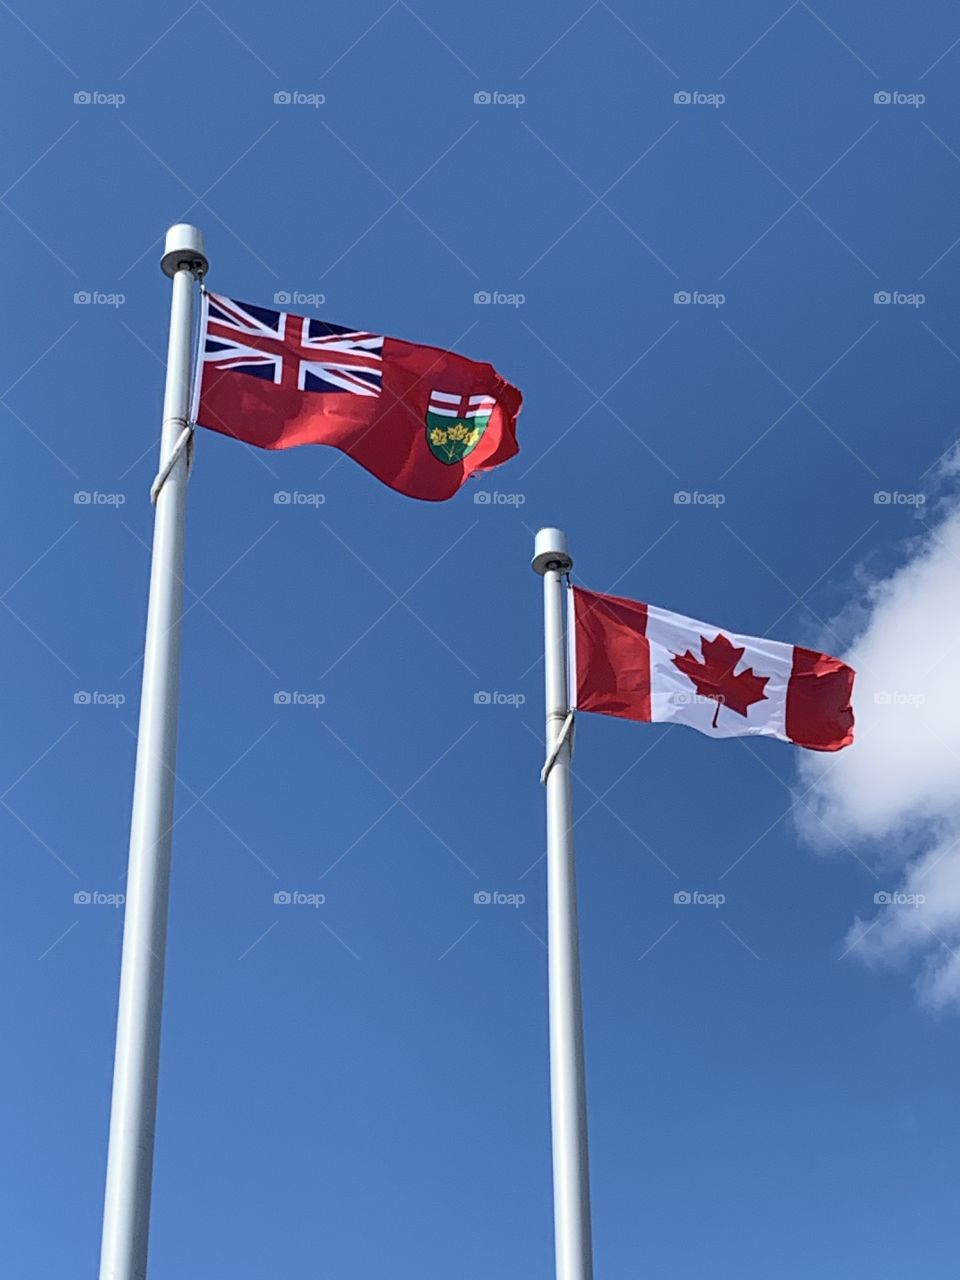 Canada and Ontario Flags